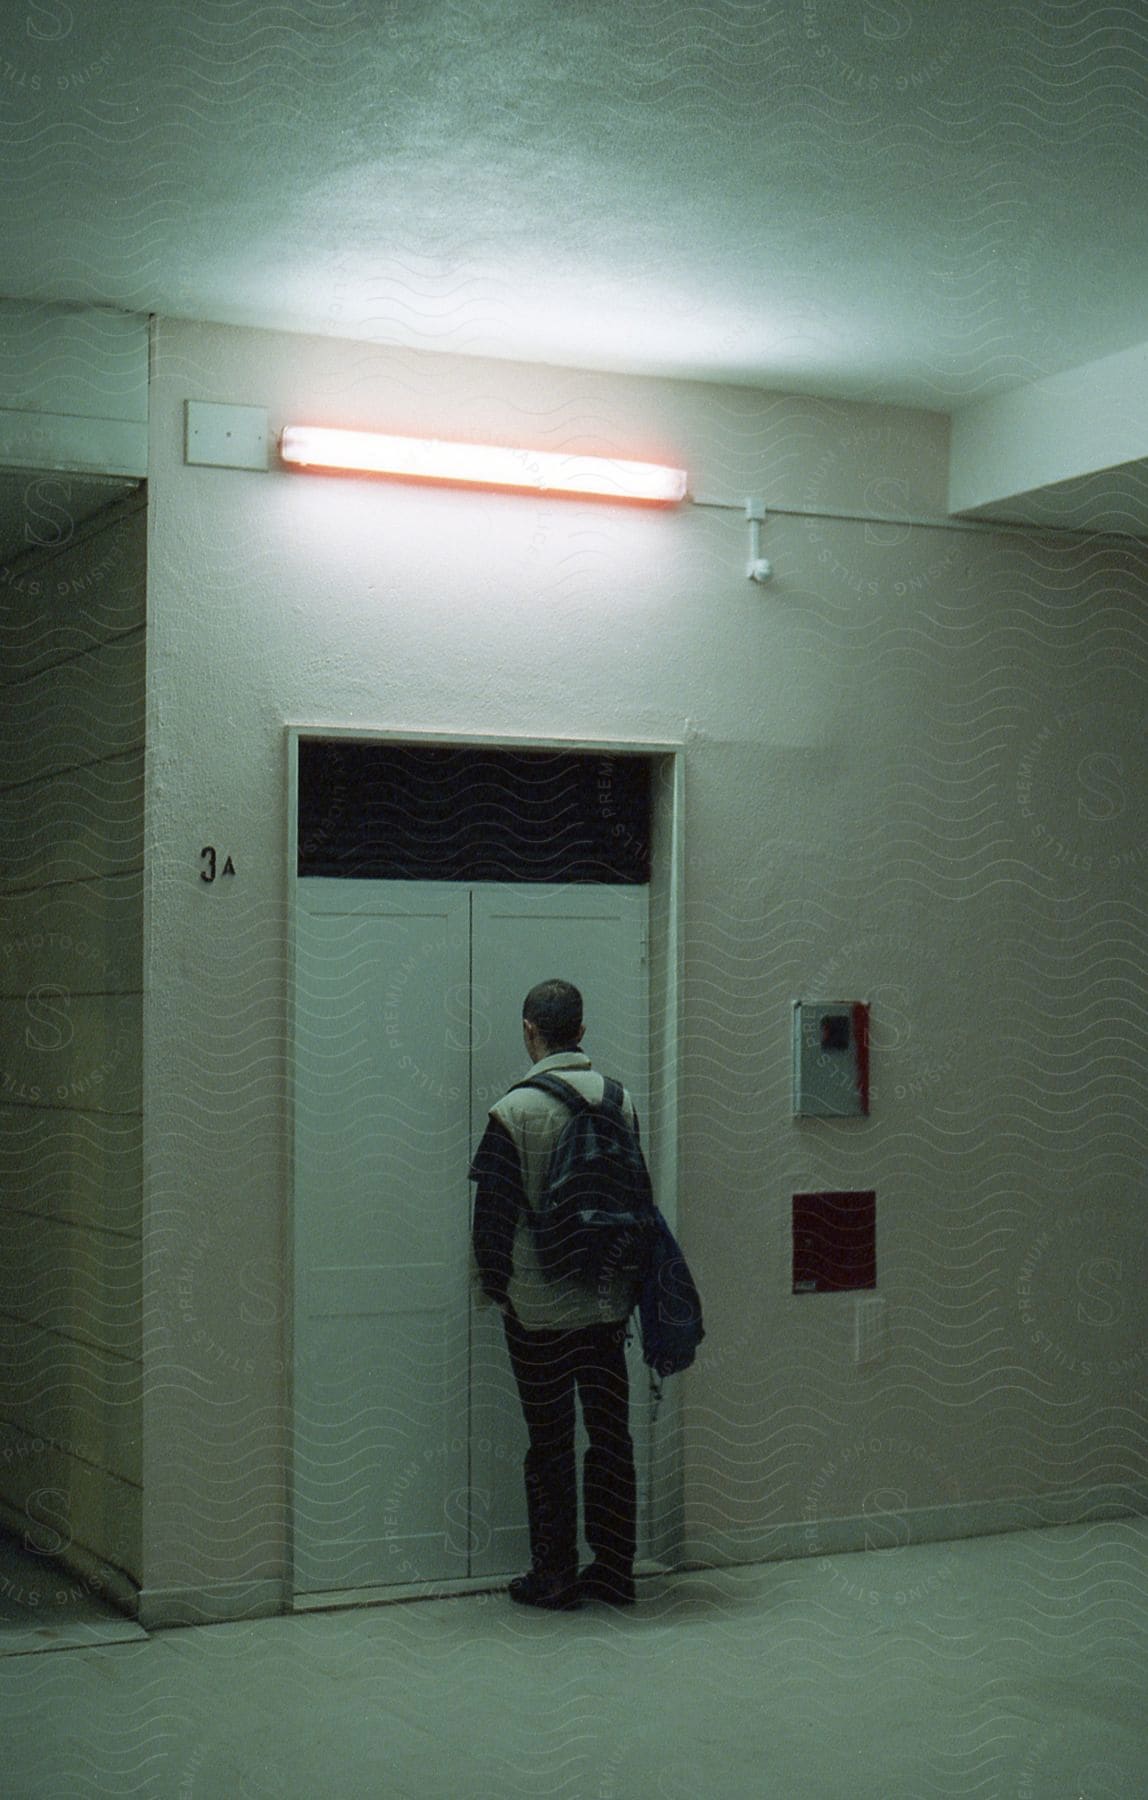 A man with a backpack stands by a closed door illuminated by a fluorescent light